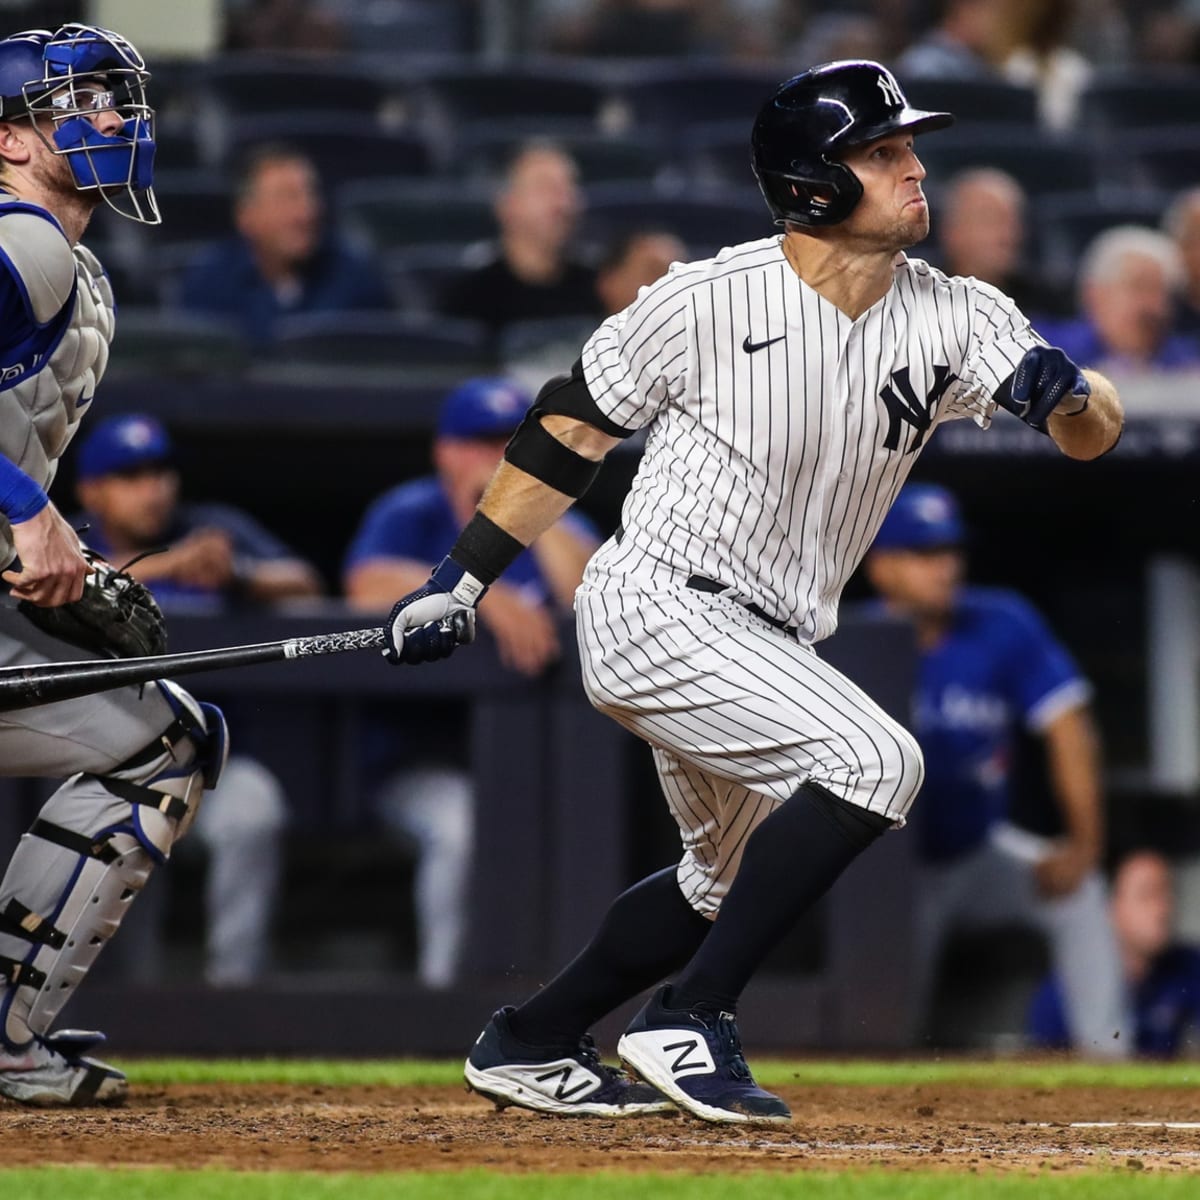 Brett Gardner on the St. Louis Cardinals? It could work